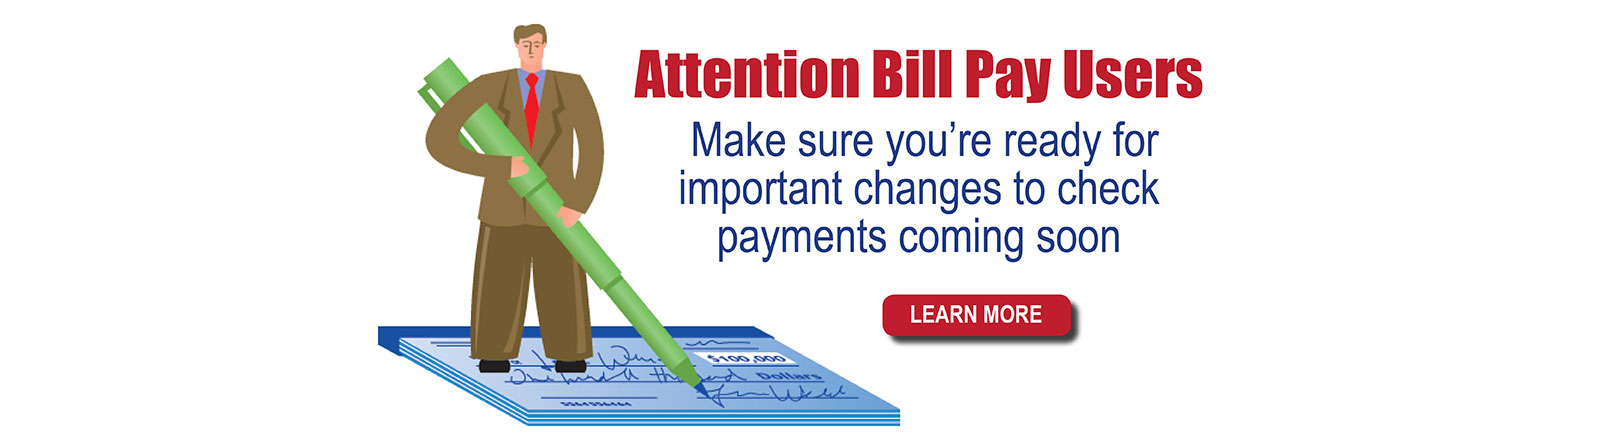 Attention Bill Pay Users: Make sure you're ready for important changes to check payments coming soon.